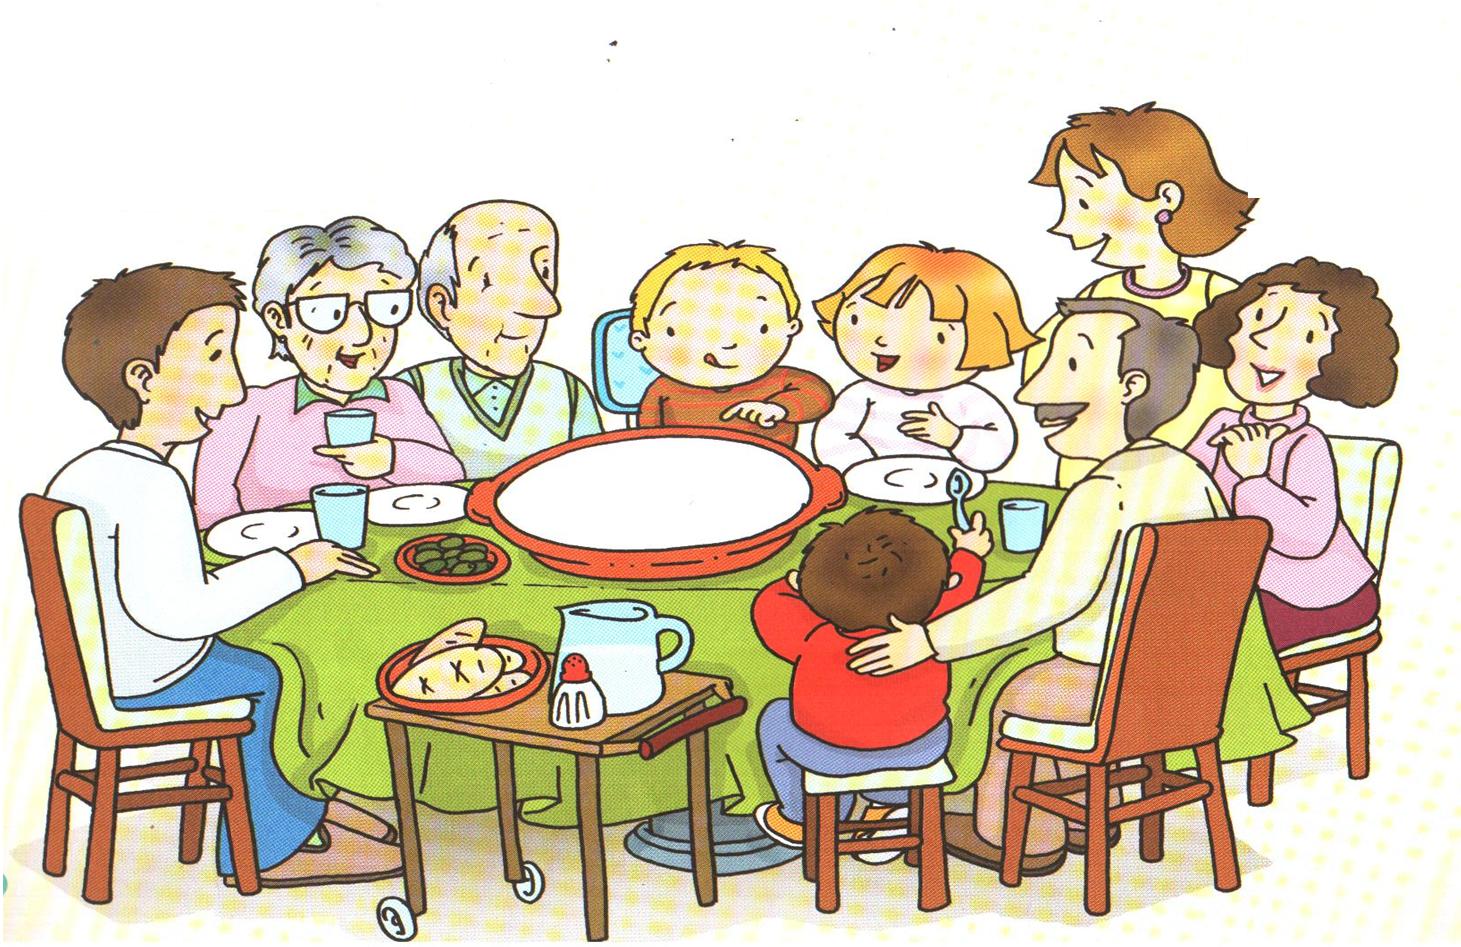 Talking about - The Family - in German